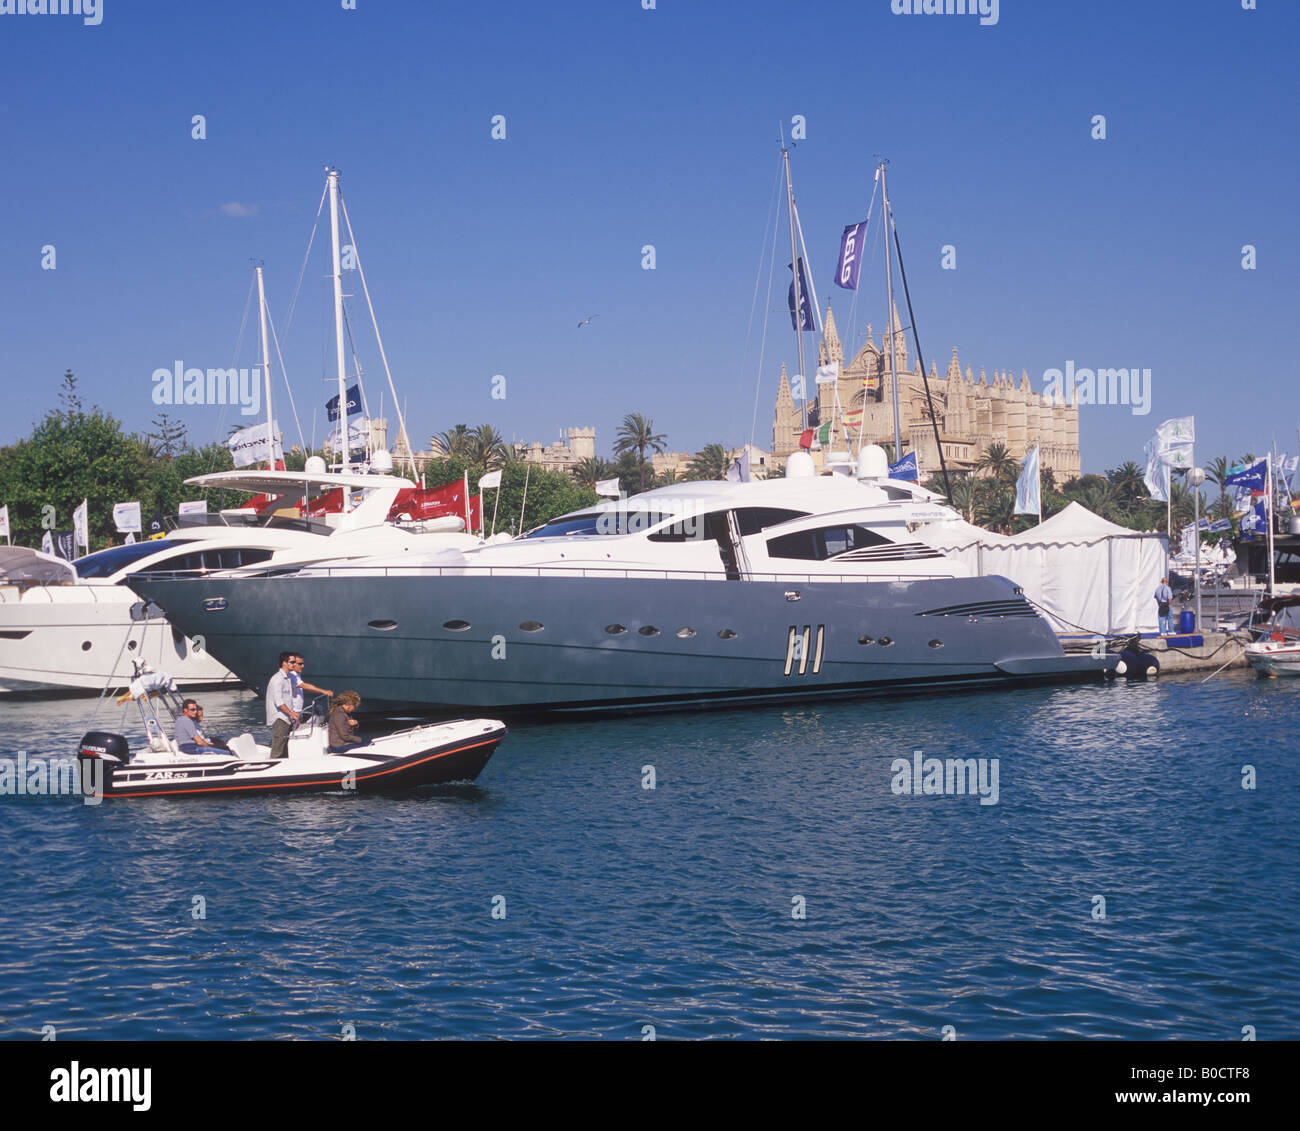 Scene with Rib and Pershing 90 superyacht motor yacht and Palma ...